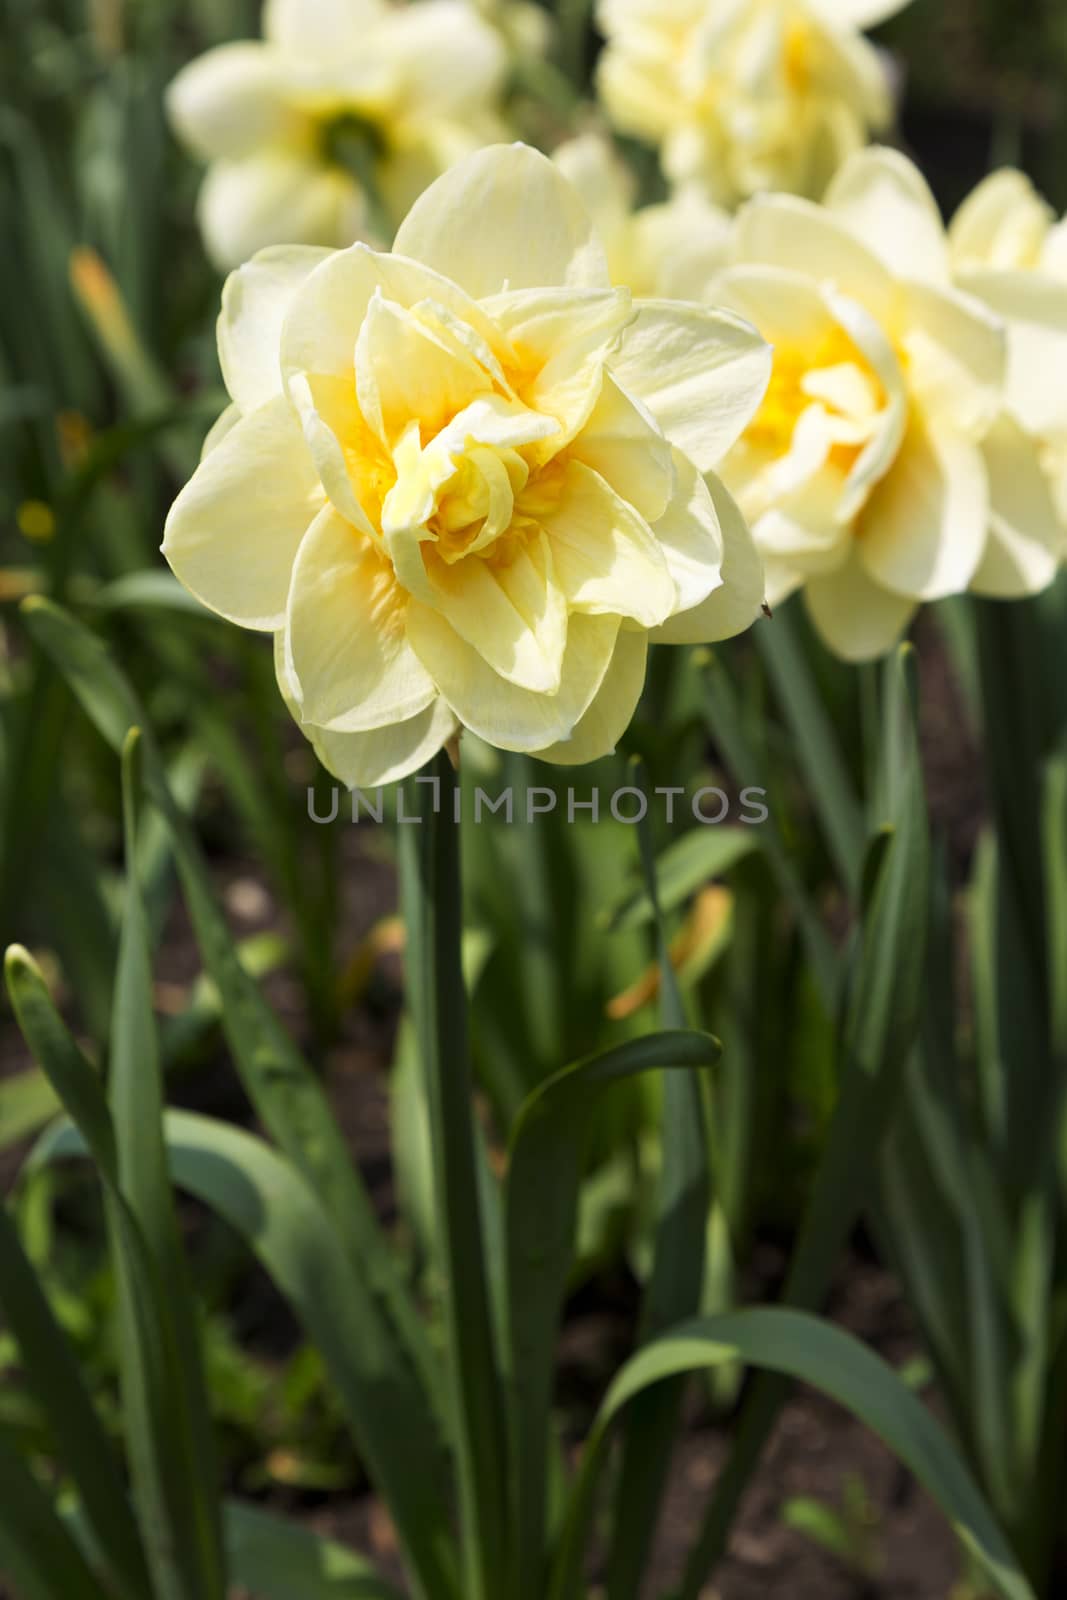 Selective focus on single, yellow daffodil in grouping of flowers.  Vertical image with copy space below. Location is Chicago suburb in Illinois, America's Midwest in May. 